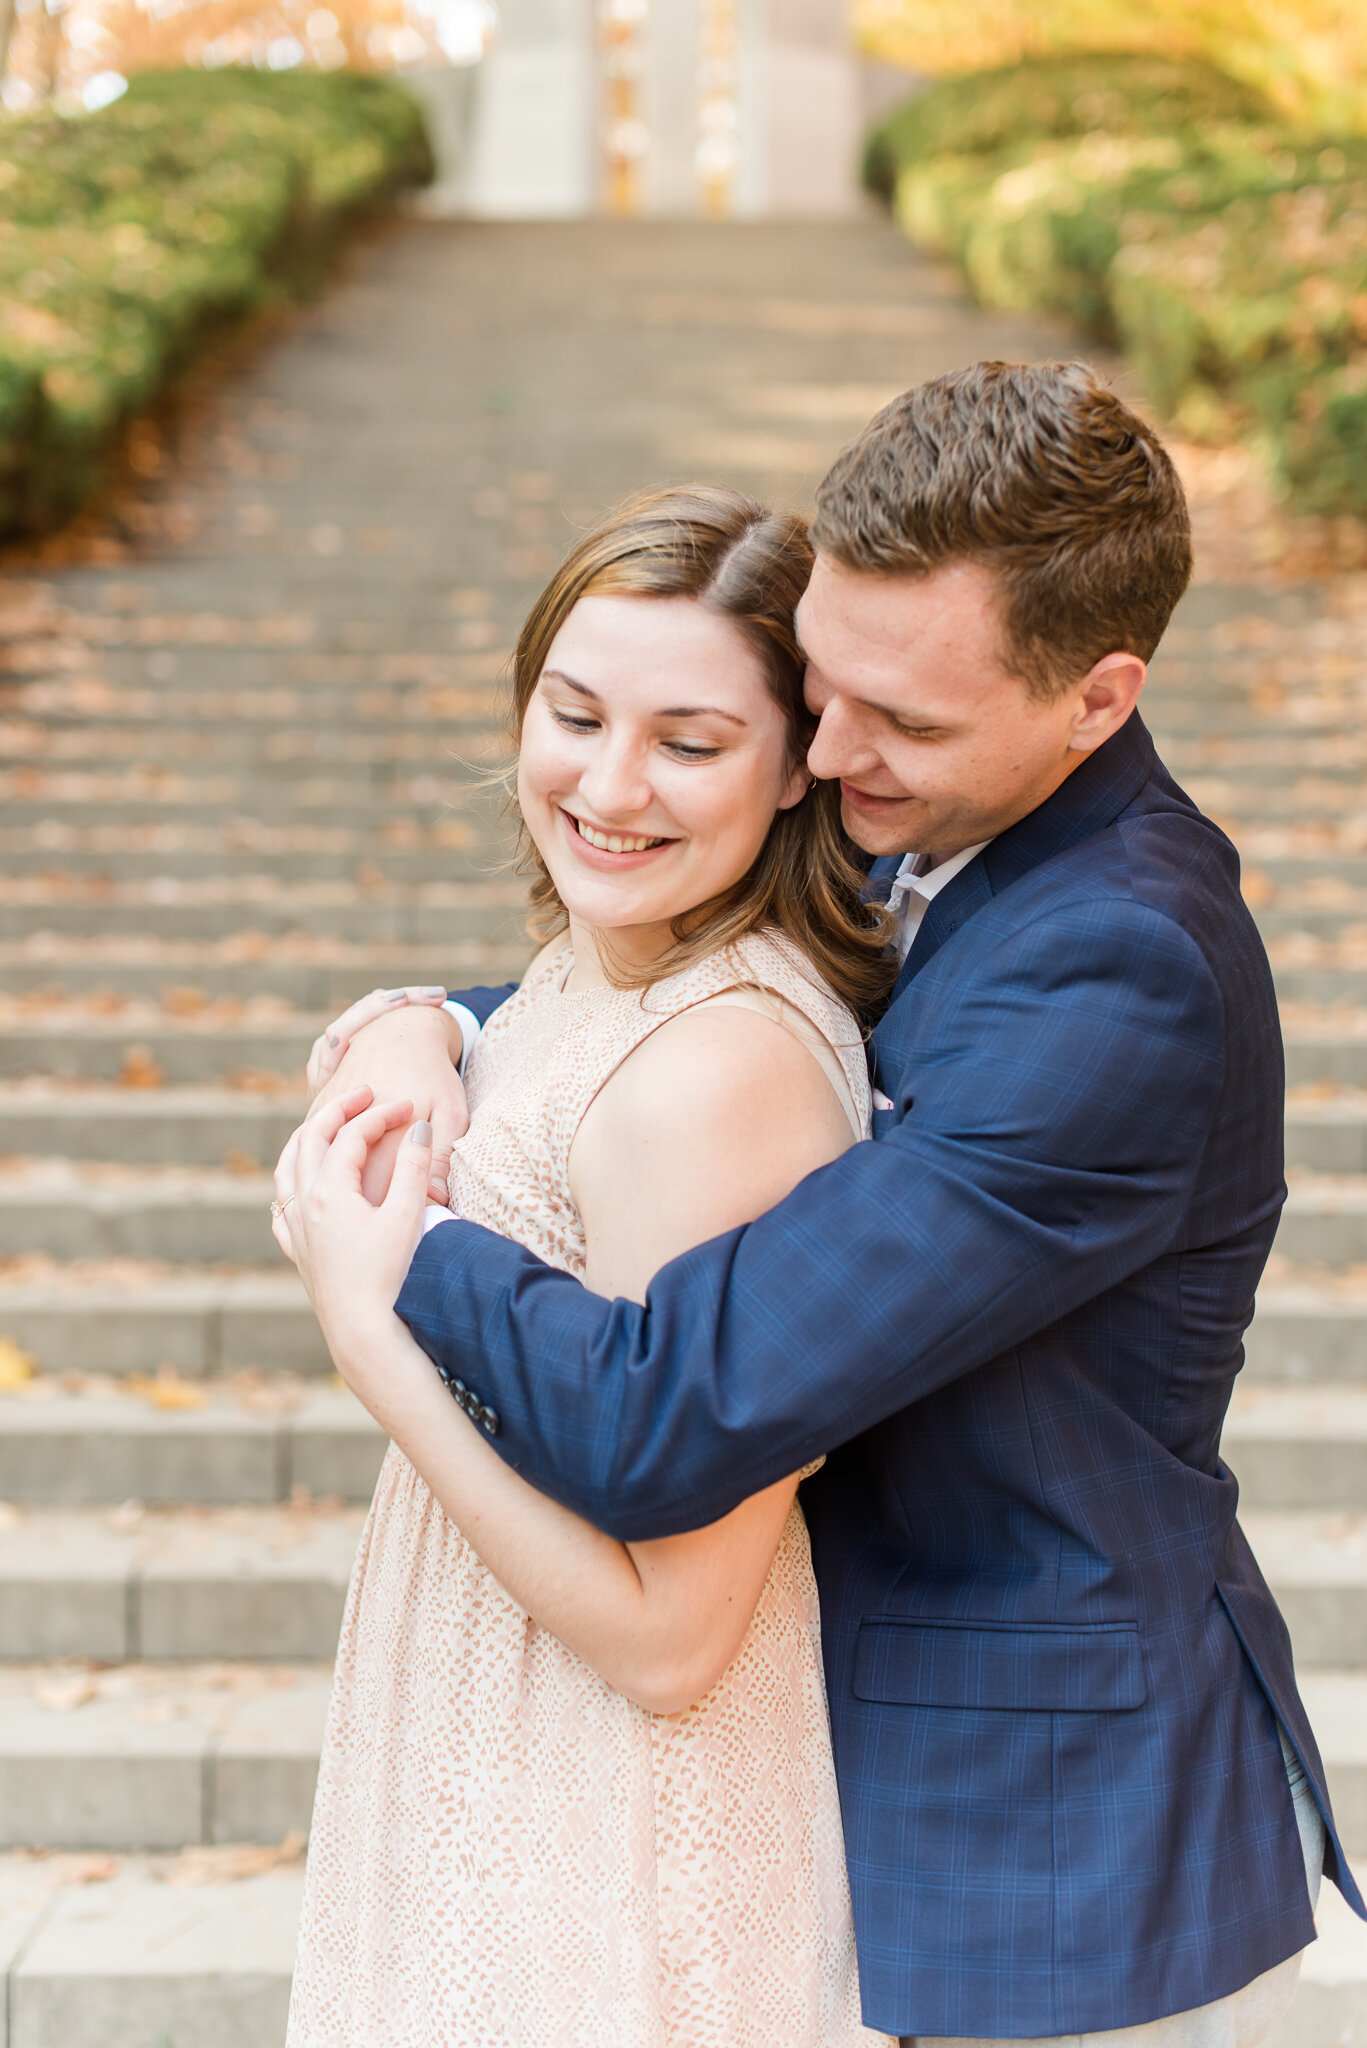 October Engagement Session at Holcomb Gardens7654.jpg